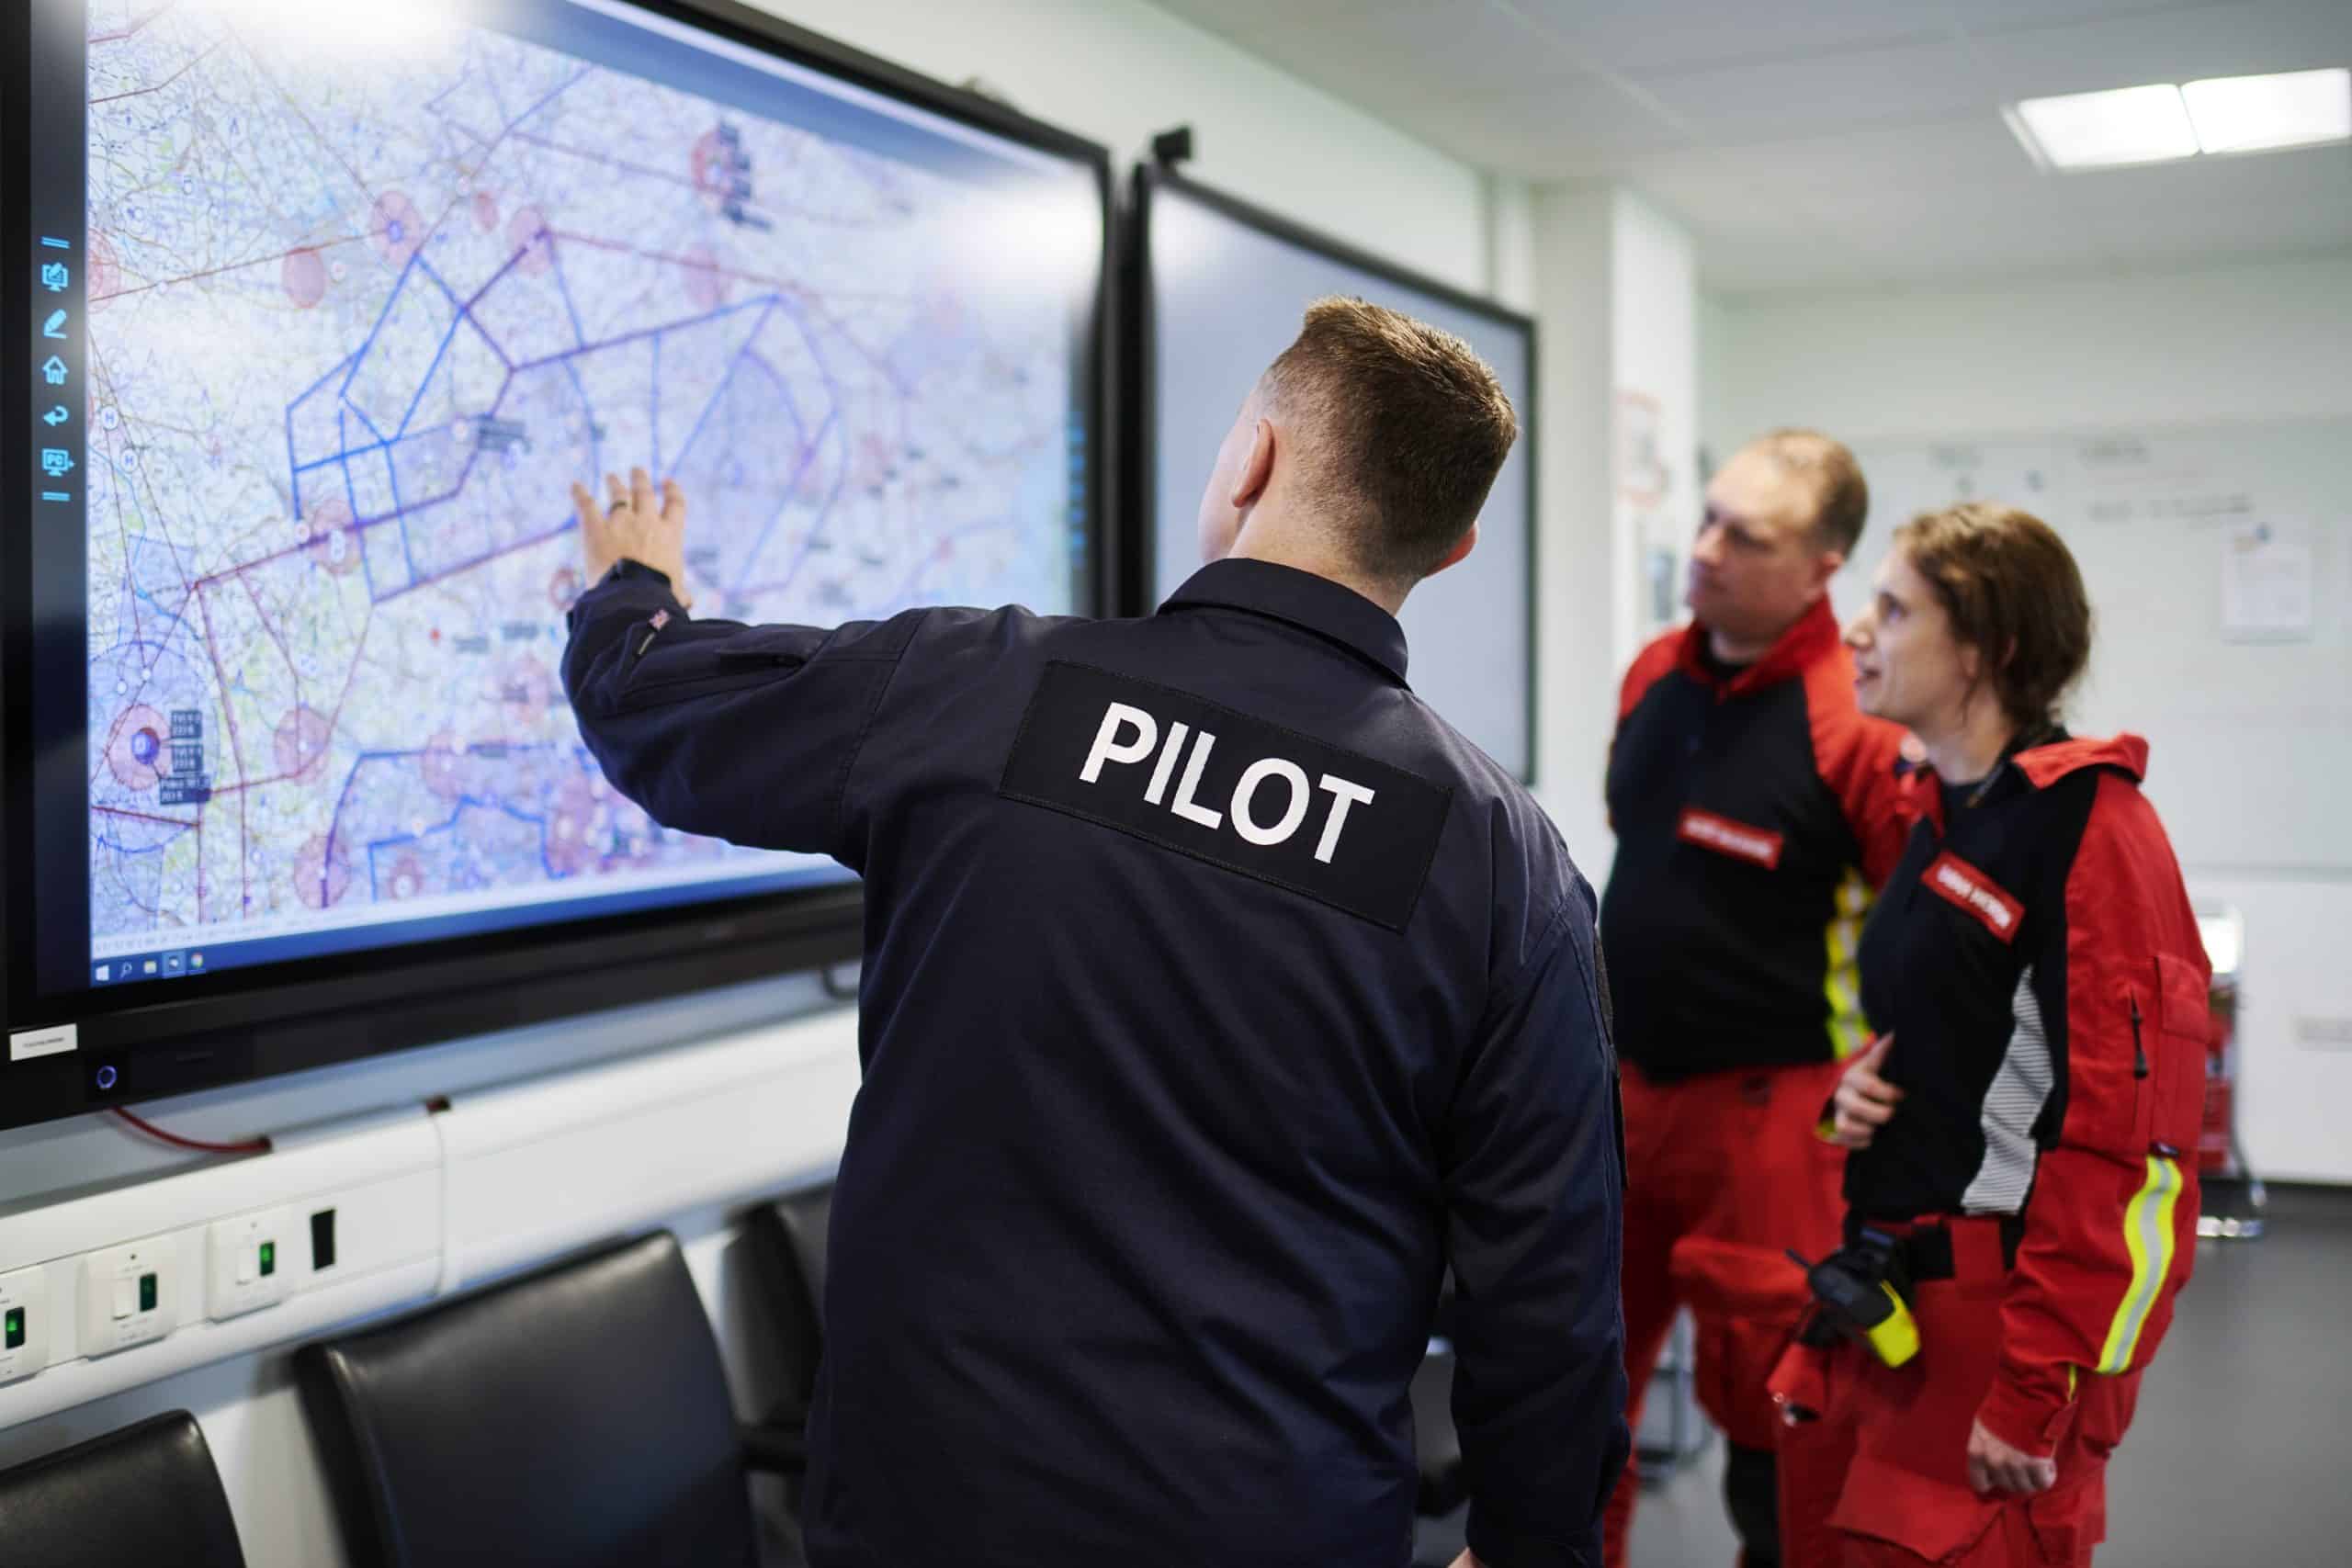 Pilot, Paramedic and Doctor planning out the route for their mission on the map